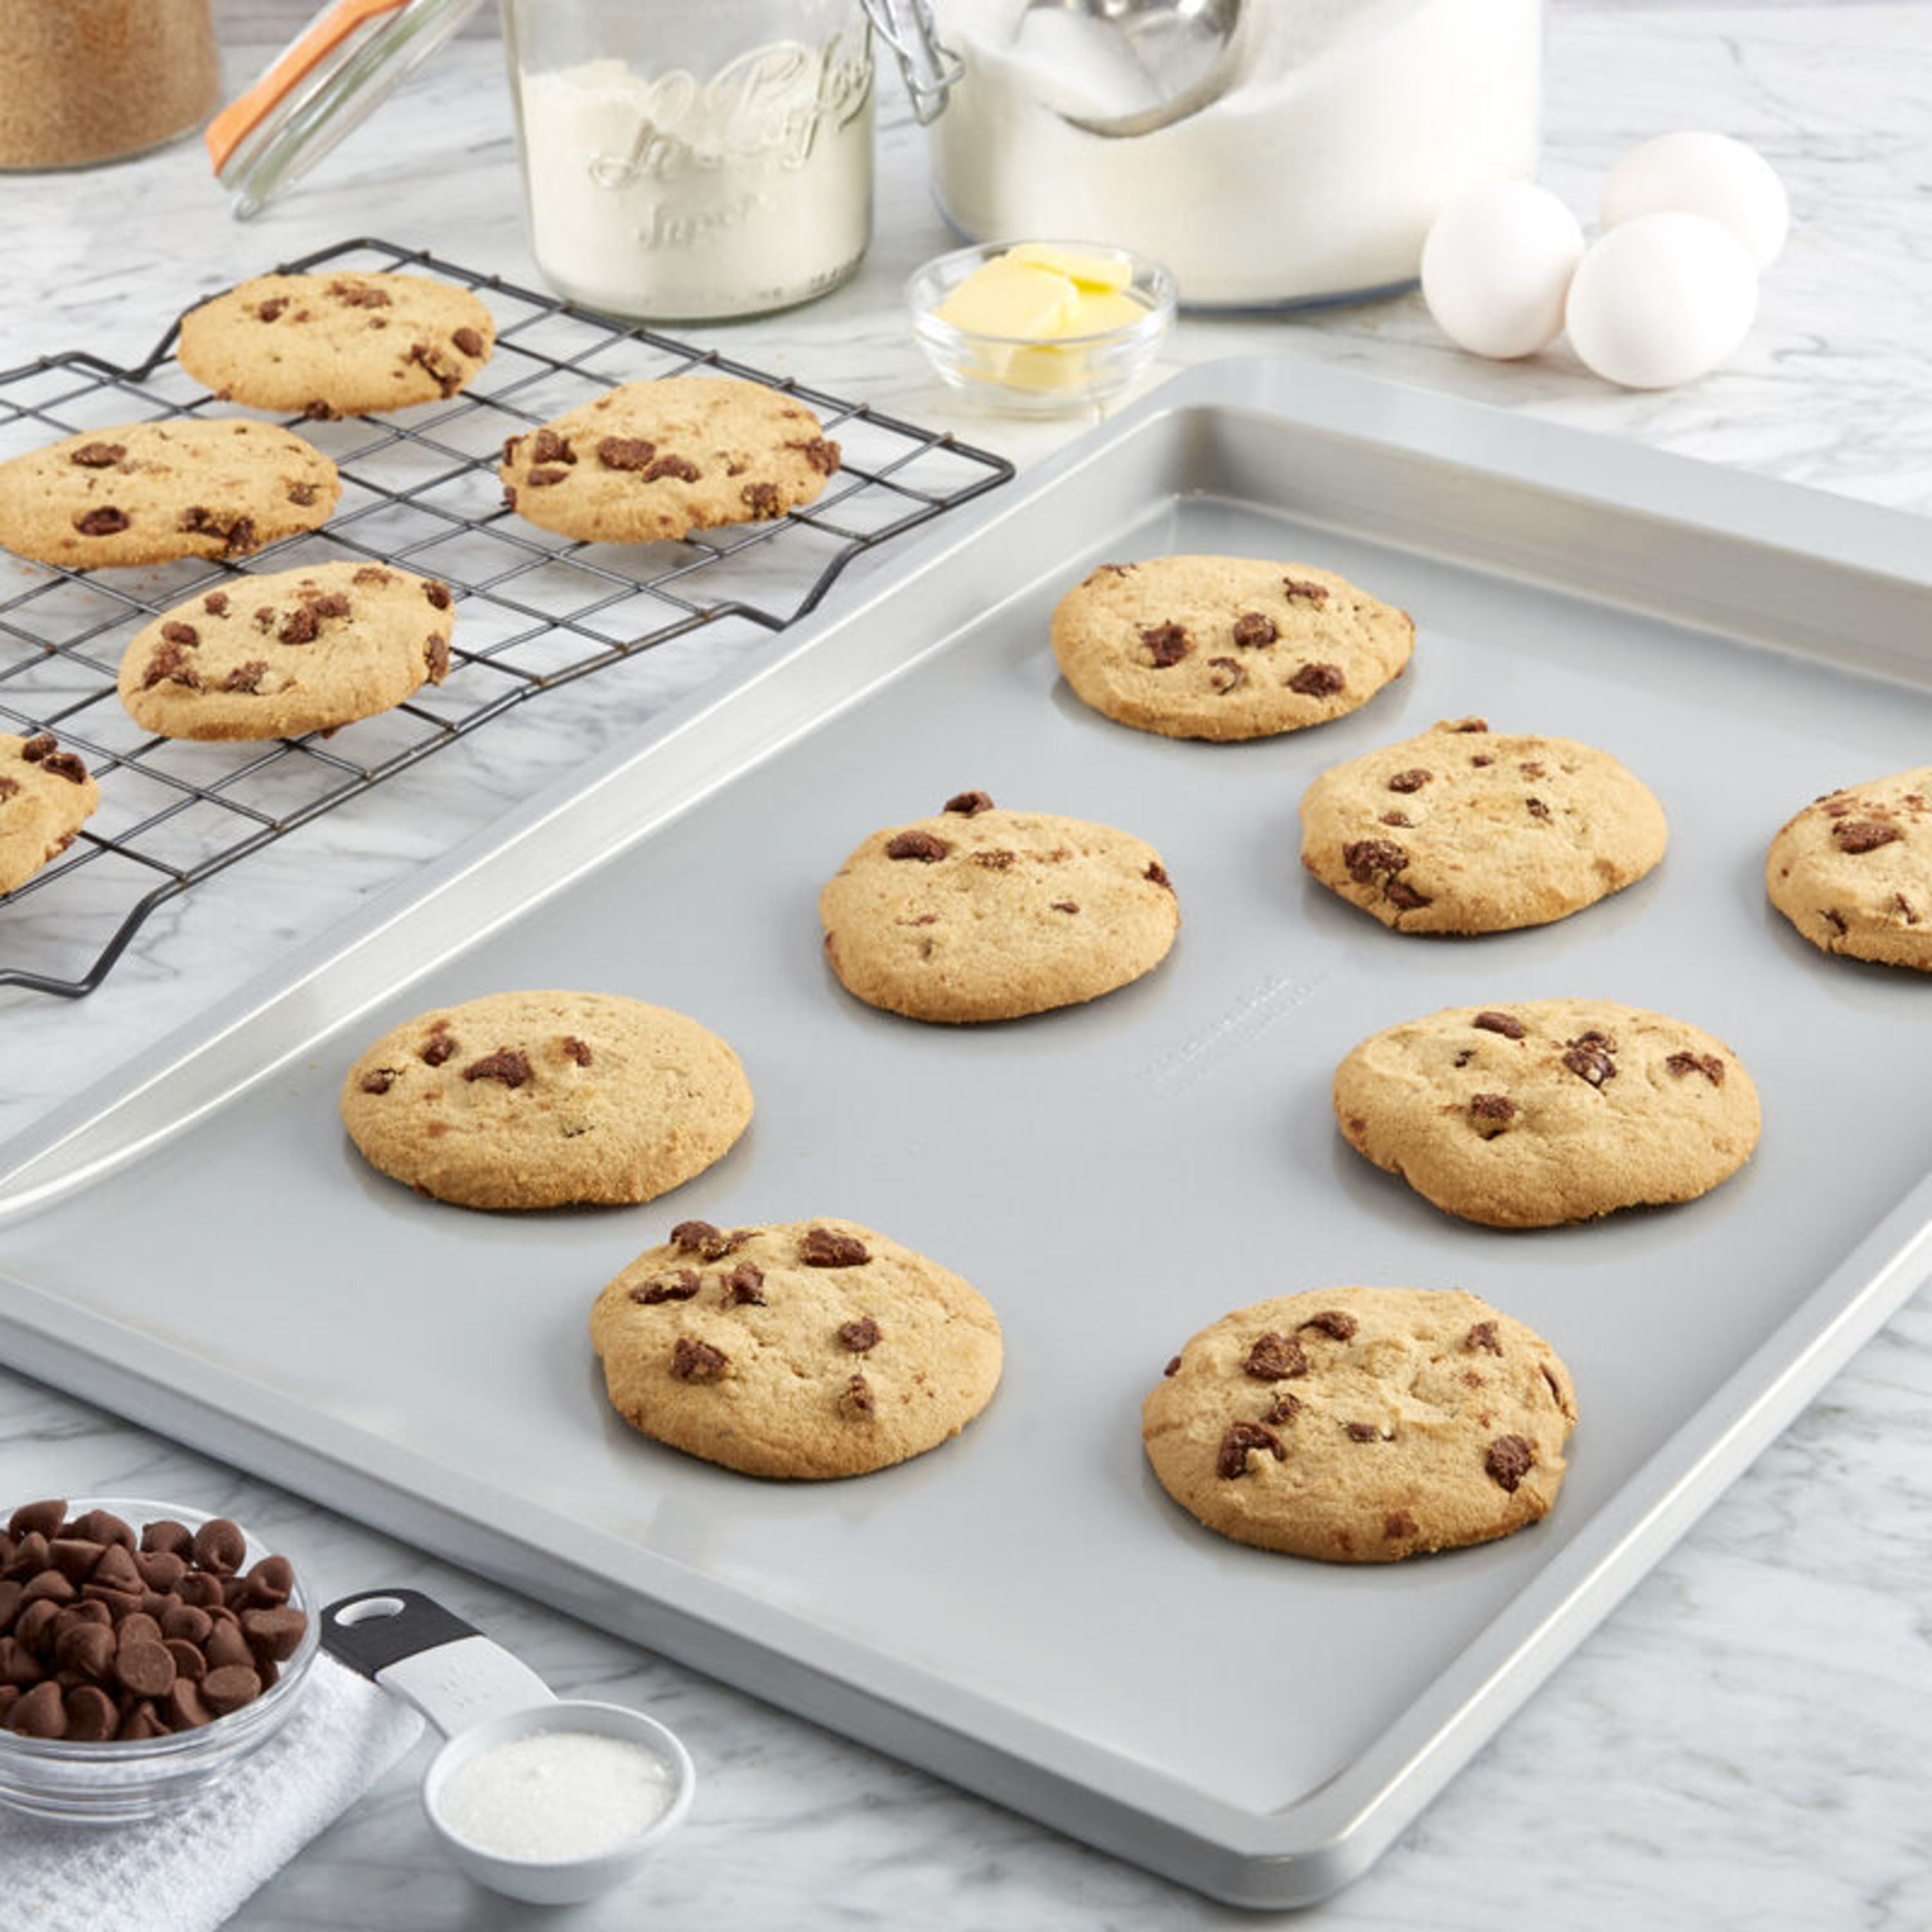 KitchenAid Nonstick 10 x 15 in Cookie Slider with Extended Handles for Easy  Grip, Aluminized Steel to Promoted Even Baking, Dishwasher Safe,Contour